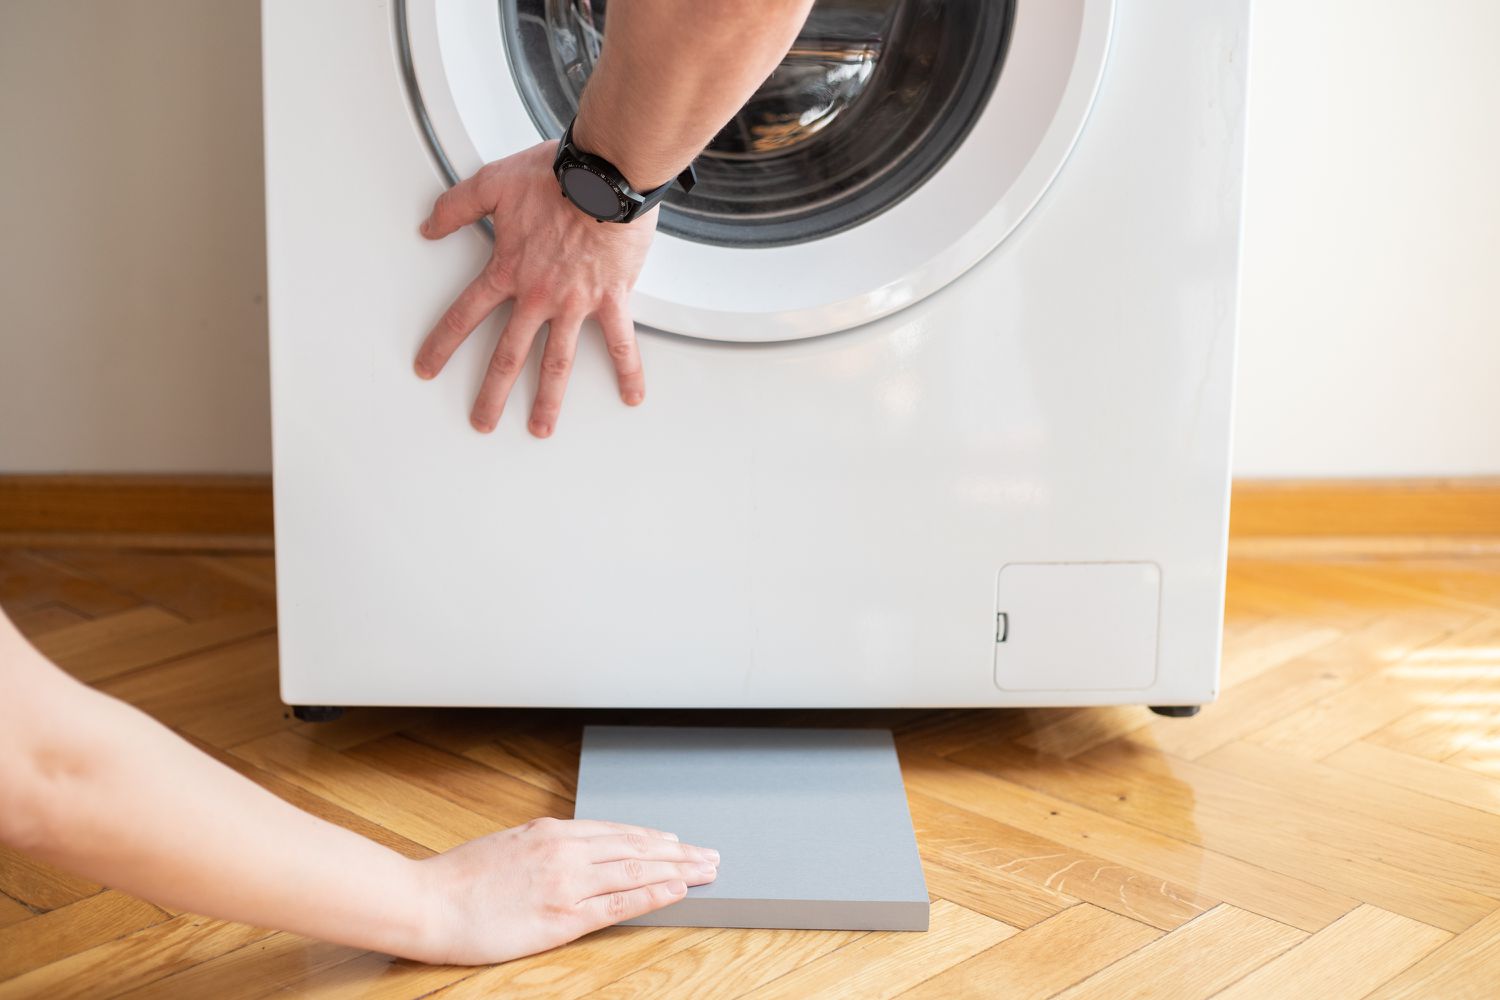 Two-by-four gray block slided in front of washing machine